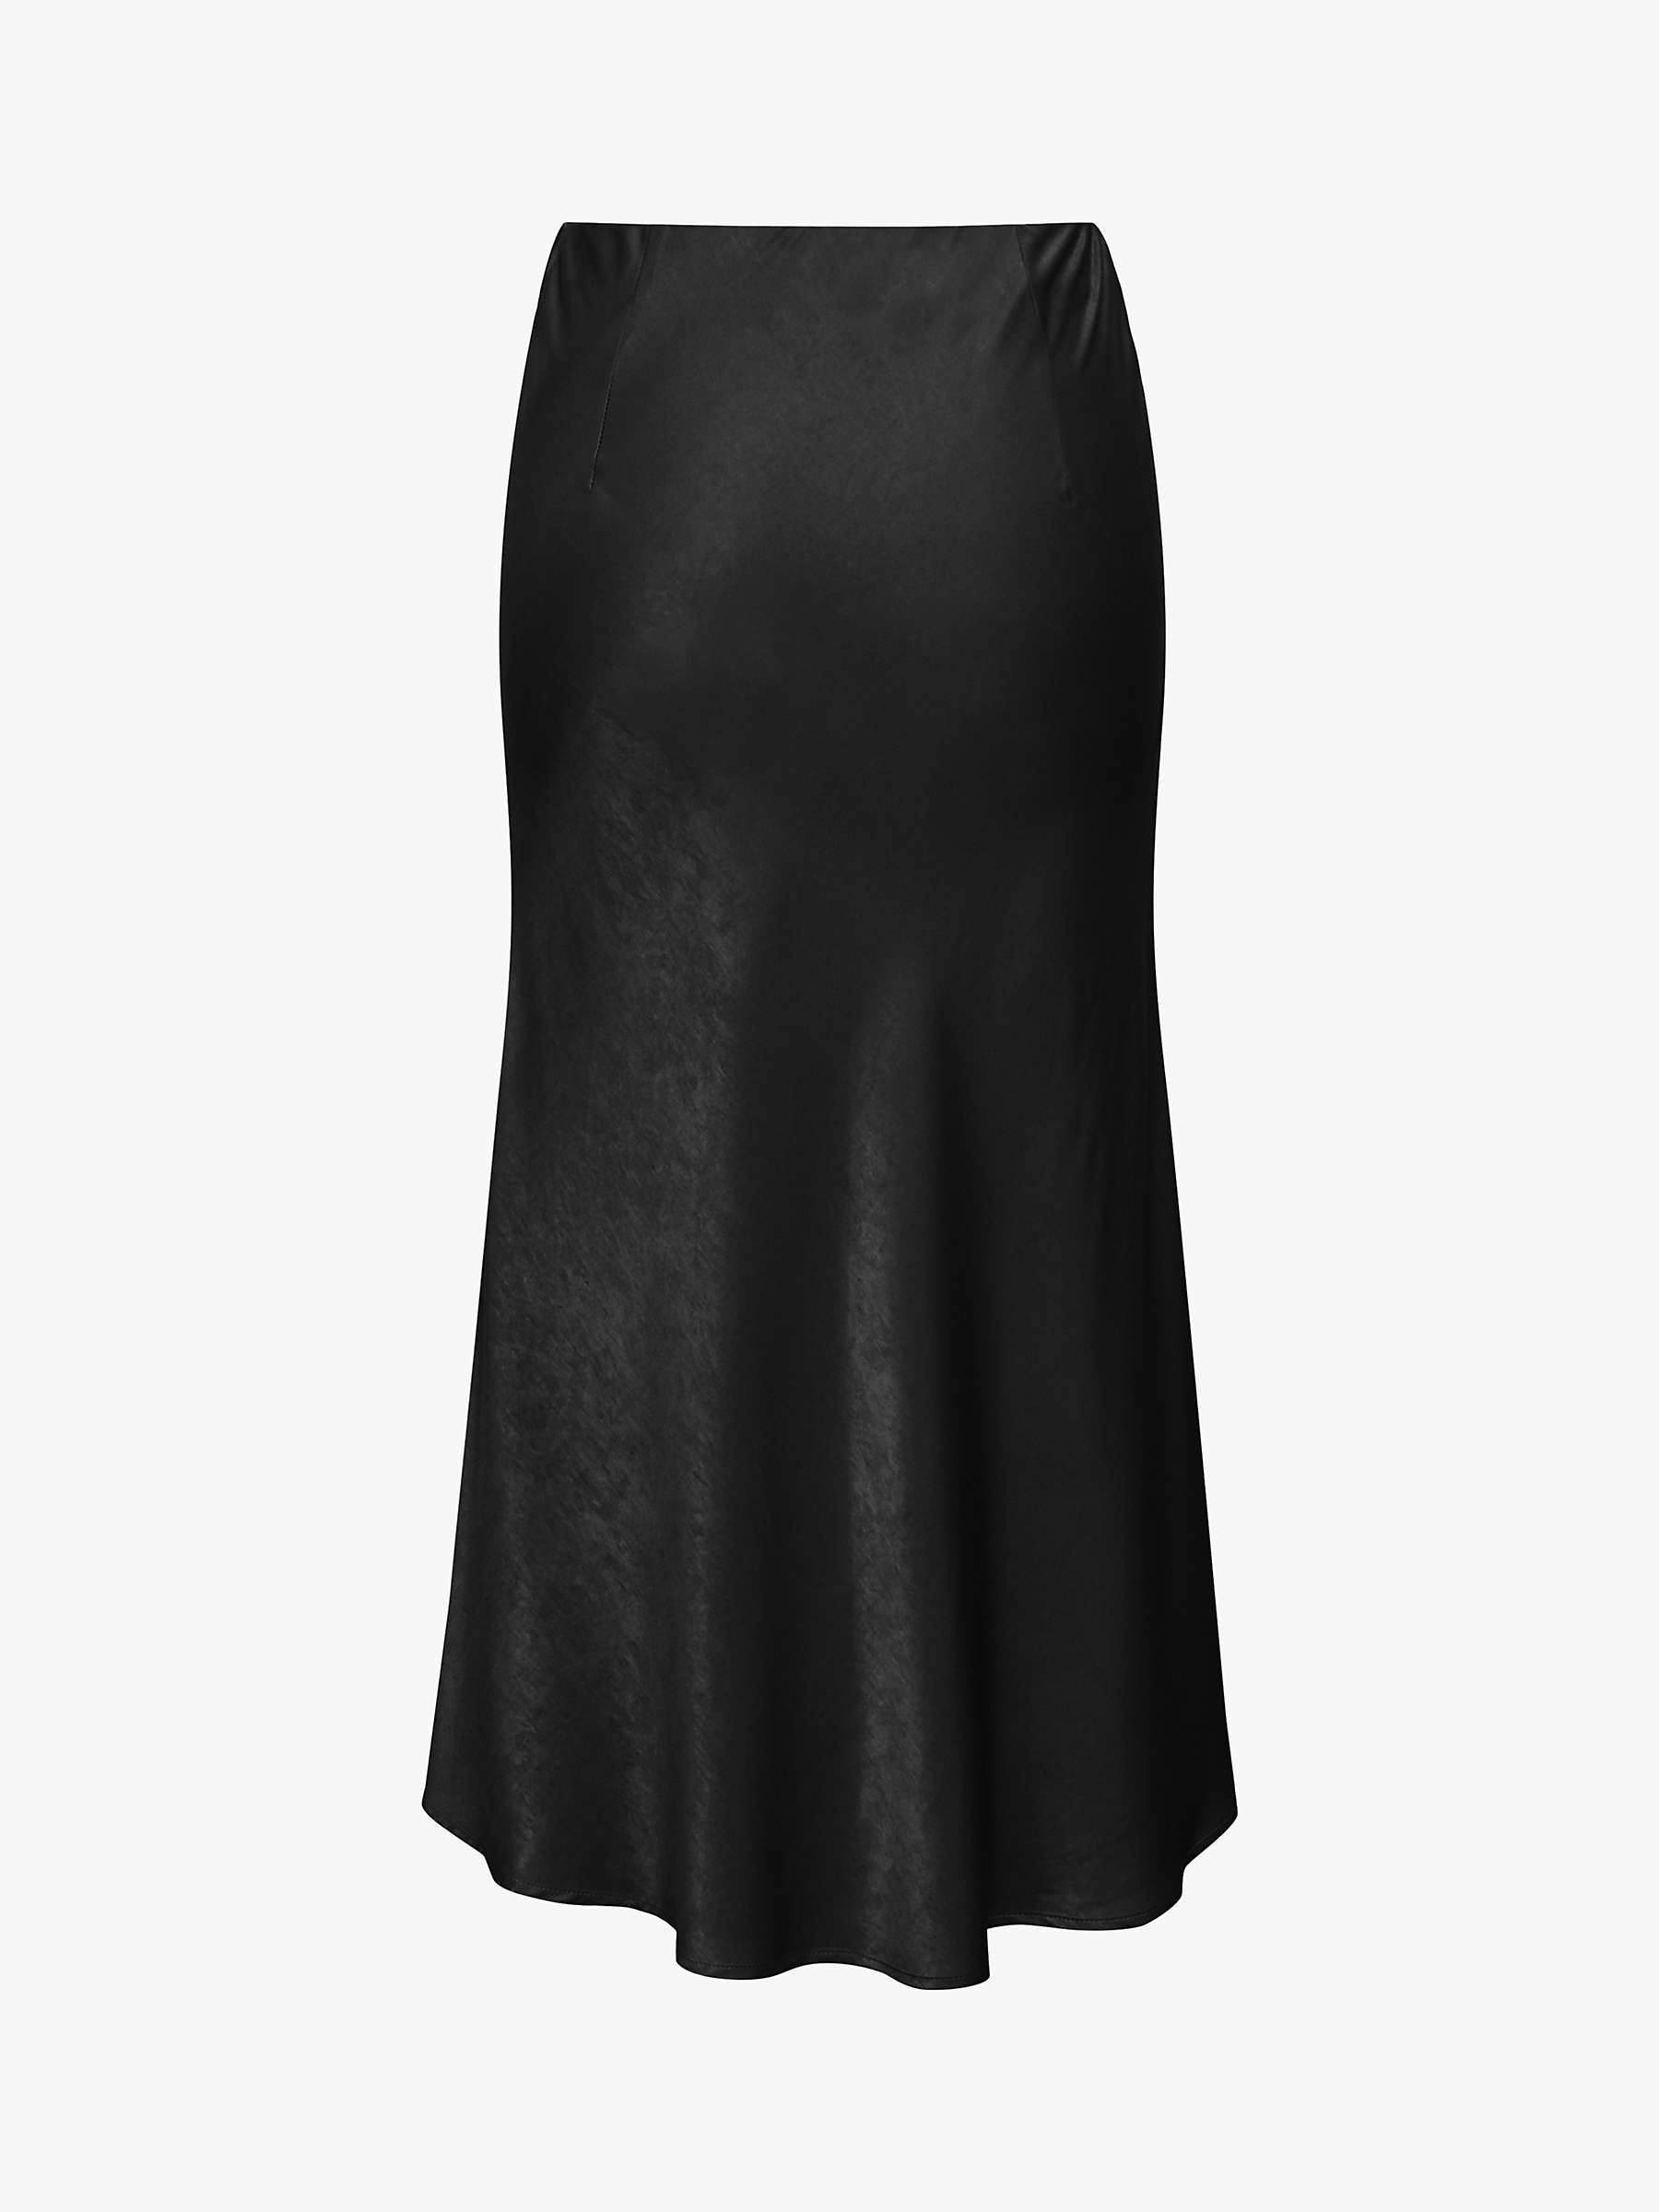 Buy A-VIEW Carry Midi Sateen Skirt, Black Online at johnlewis.com